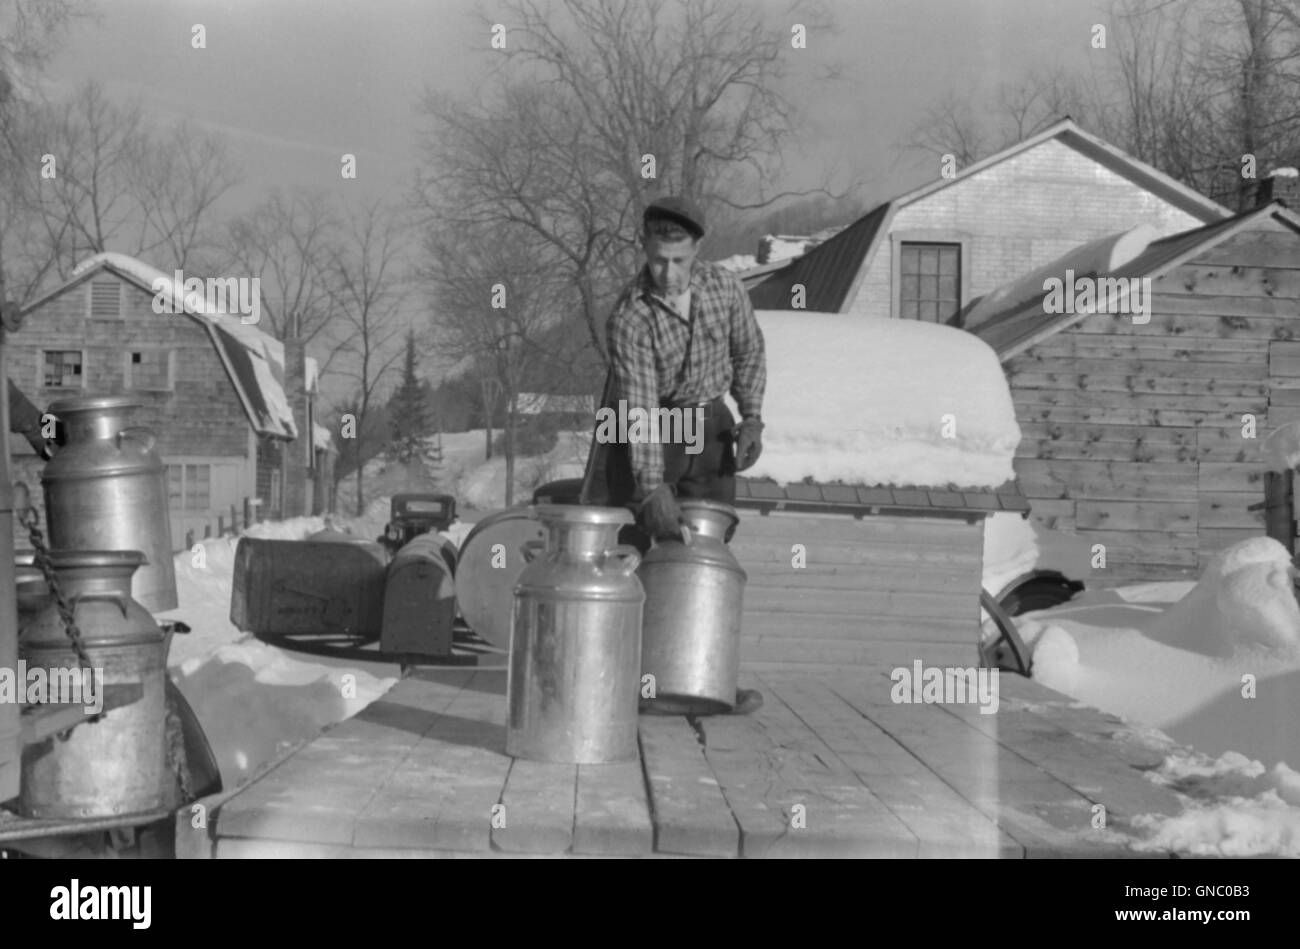 Farmer bringing milk churns to Crossroads early in morning where they are picked up by co-op farmers and delivered to city, near Woodstock, Vermont, USA, Marion Post Wolcott, U.S. Farm Security Administration, March 1940 Stock Photo